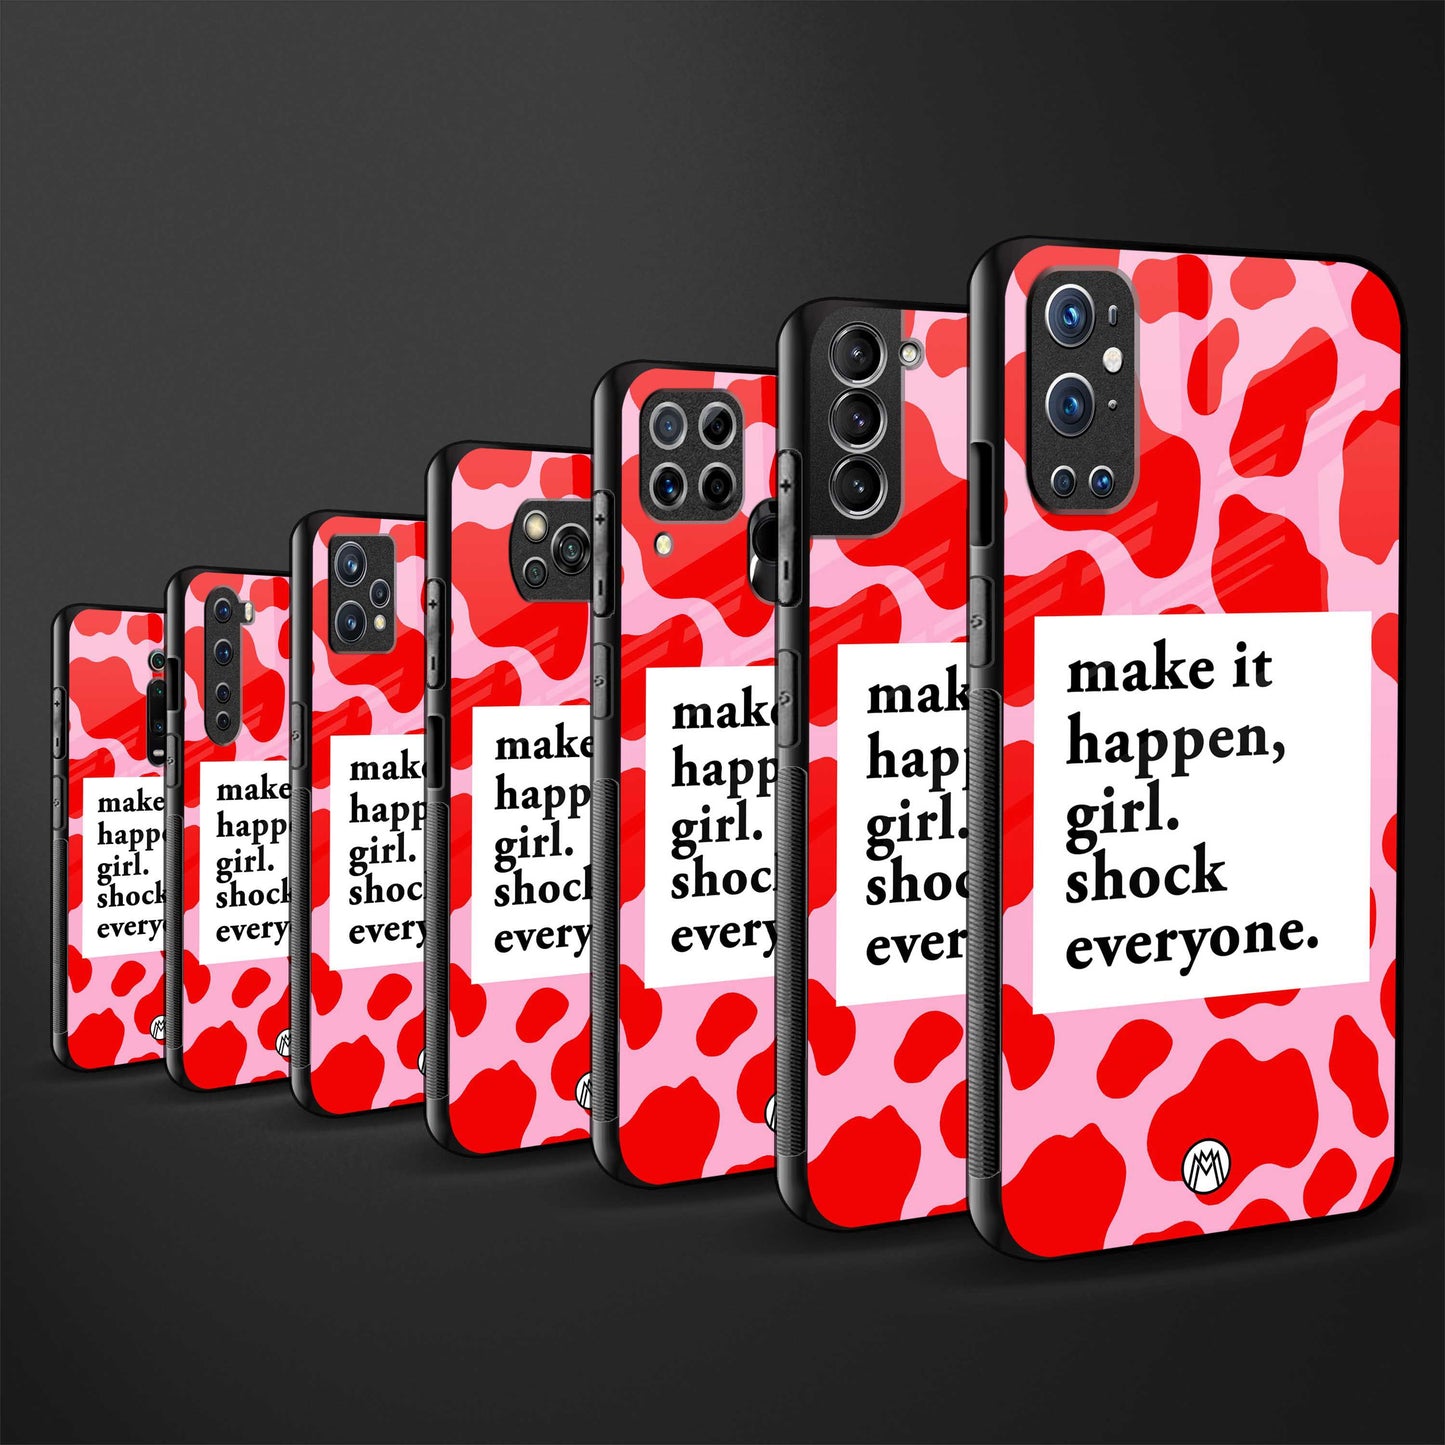 make it happen girl glass case for phone case | glass case for samsung galaxy s23 plus